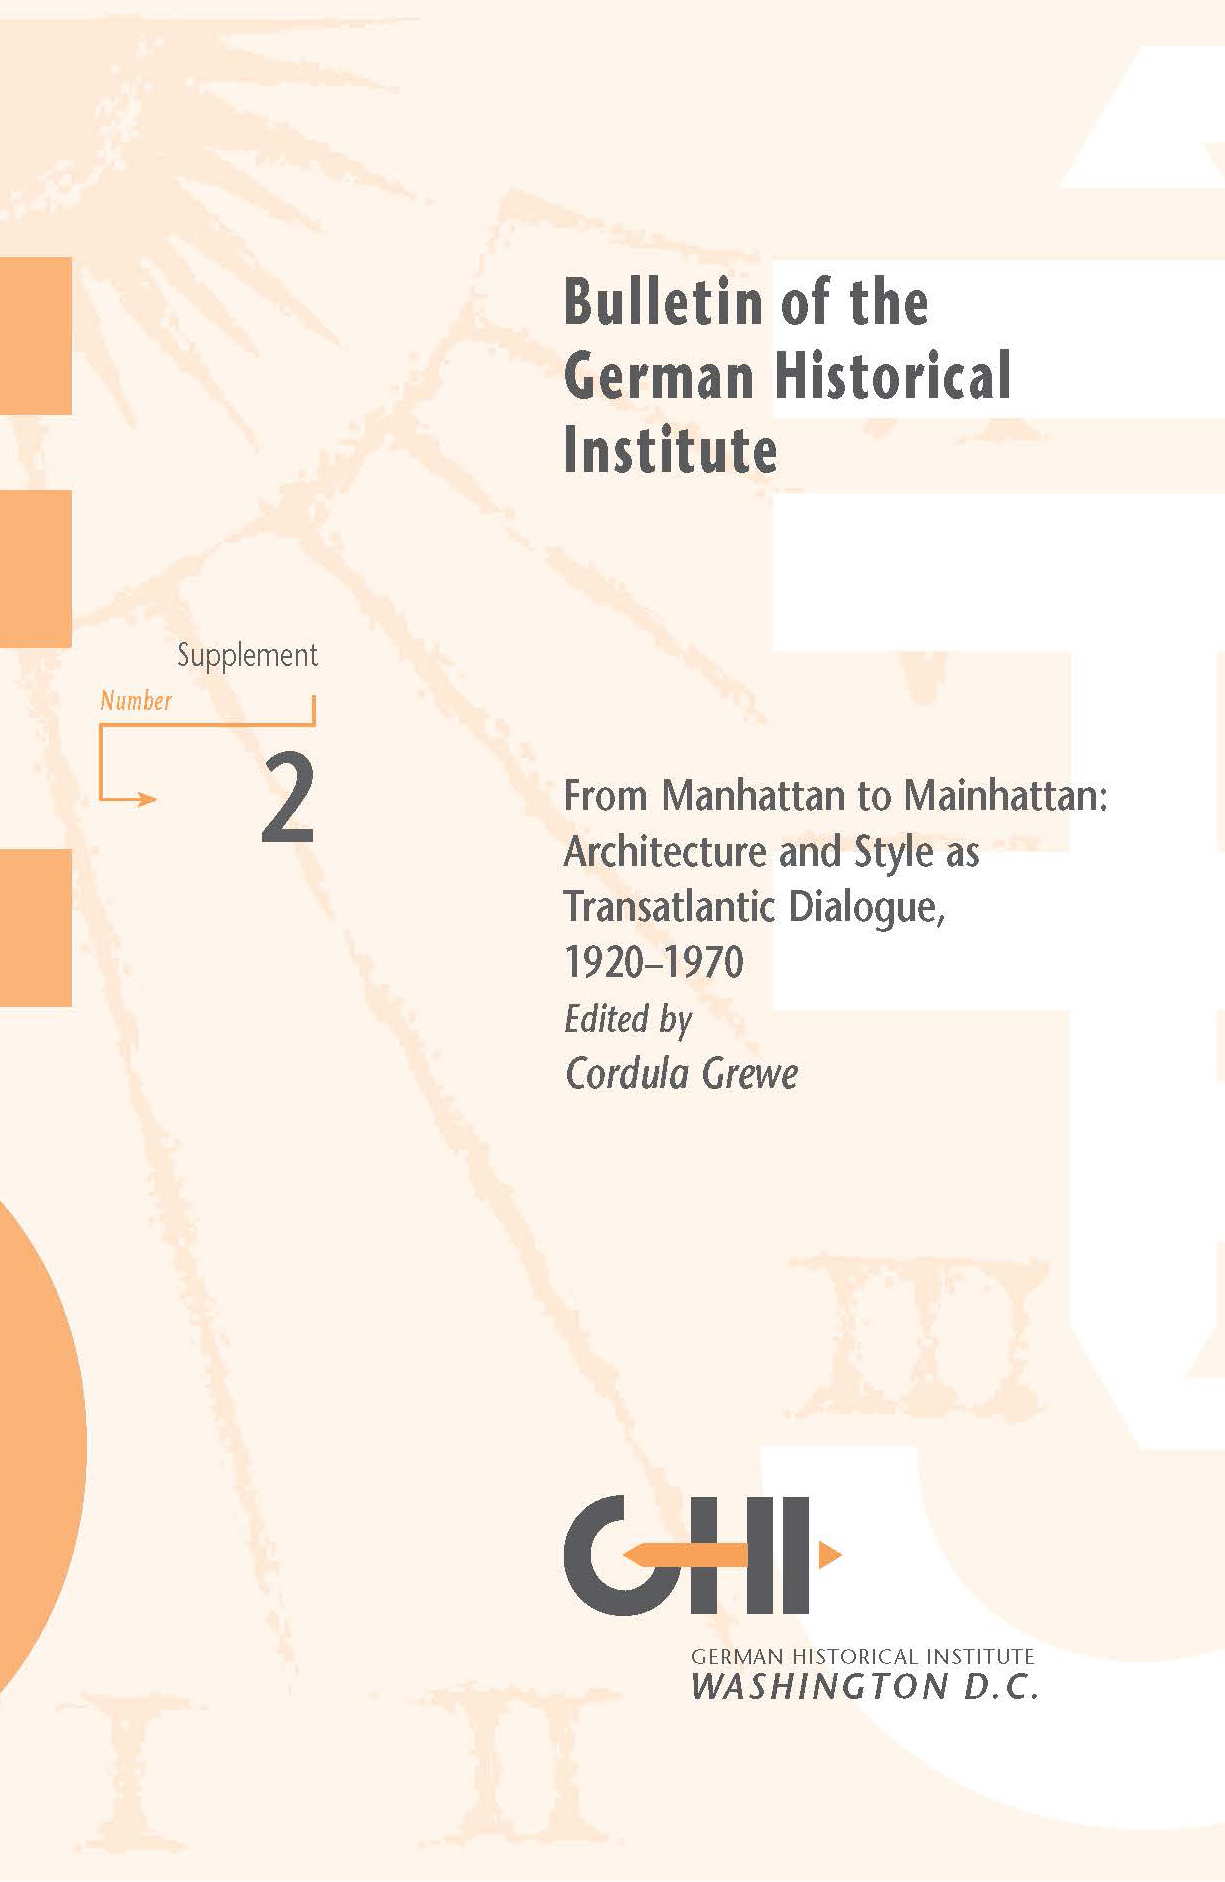 From Manhattan to Mainhattan: Architecture and Style as Transatlantic Dialogue, 1920-1970